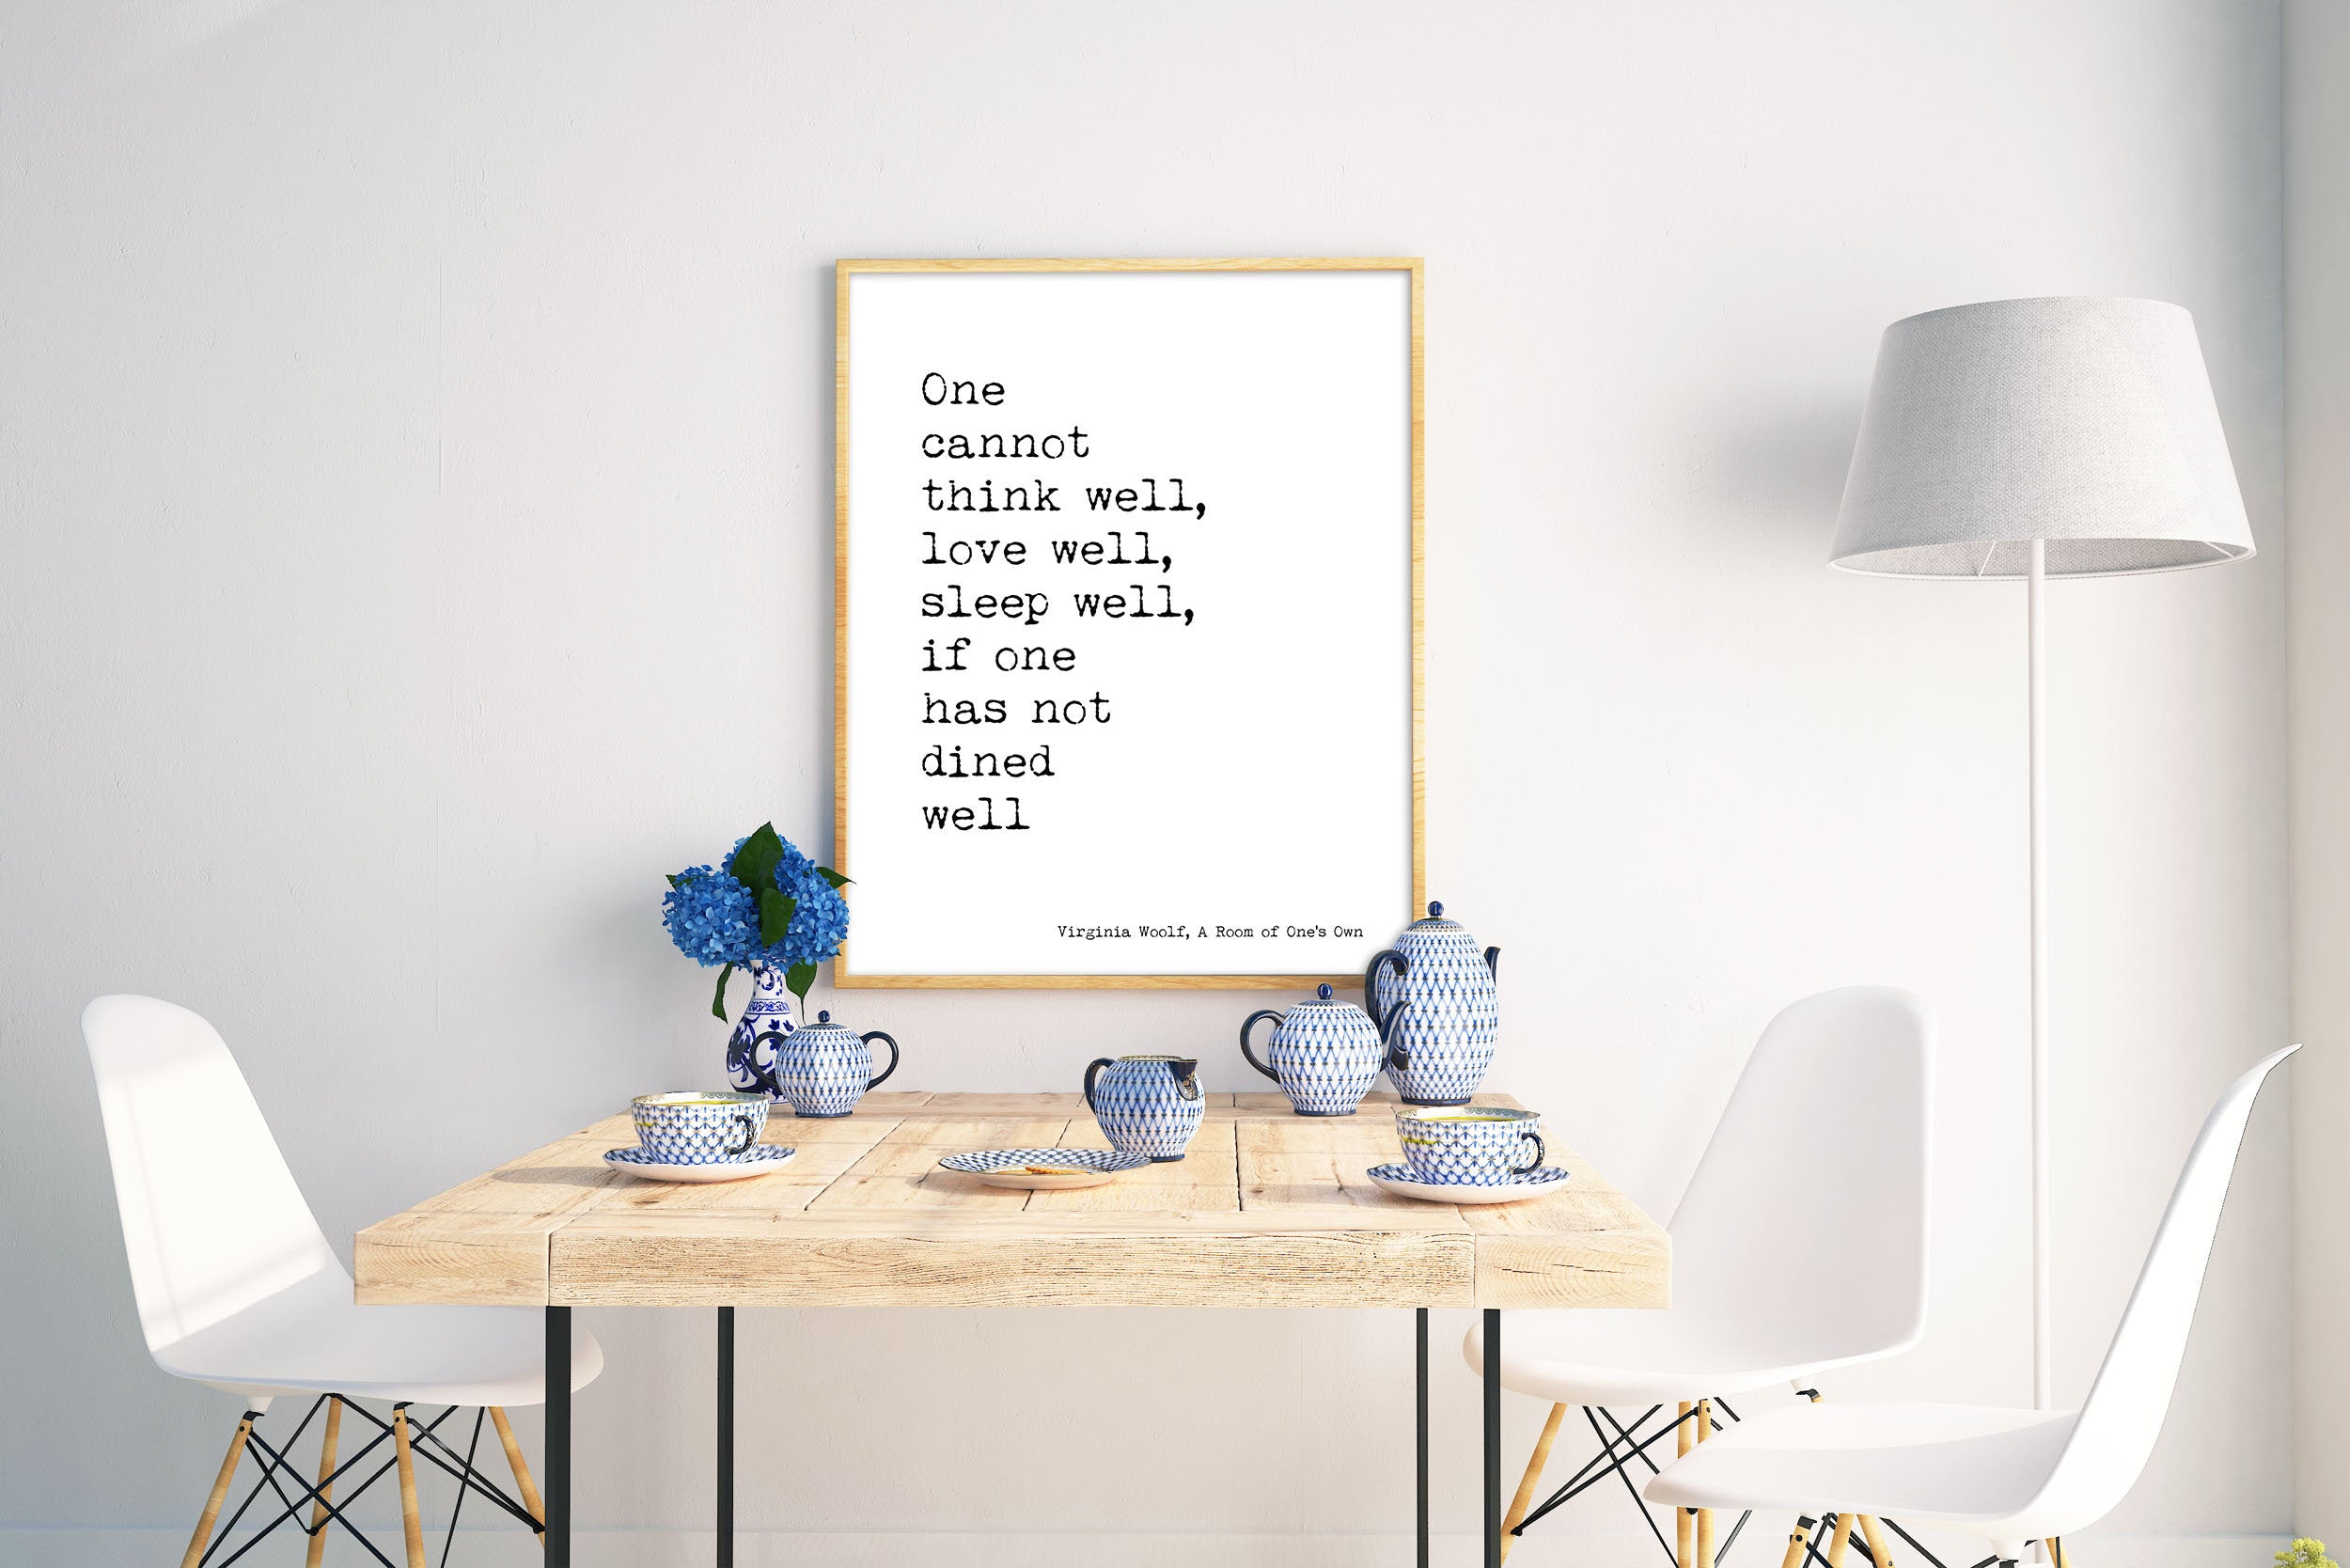 Virginia Woolf Dined Well Quote Print, A Room of One's Own, Kitchen Quote Decor, Inspirational Poster Unframed - BookQuoteDecor